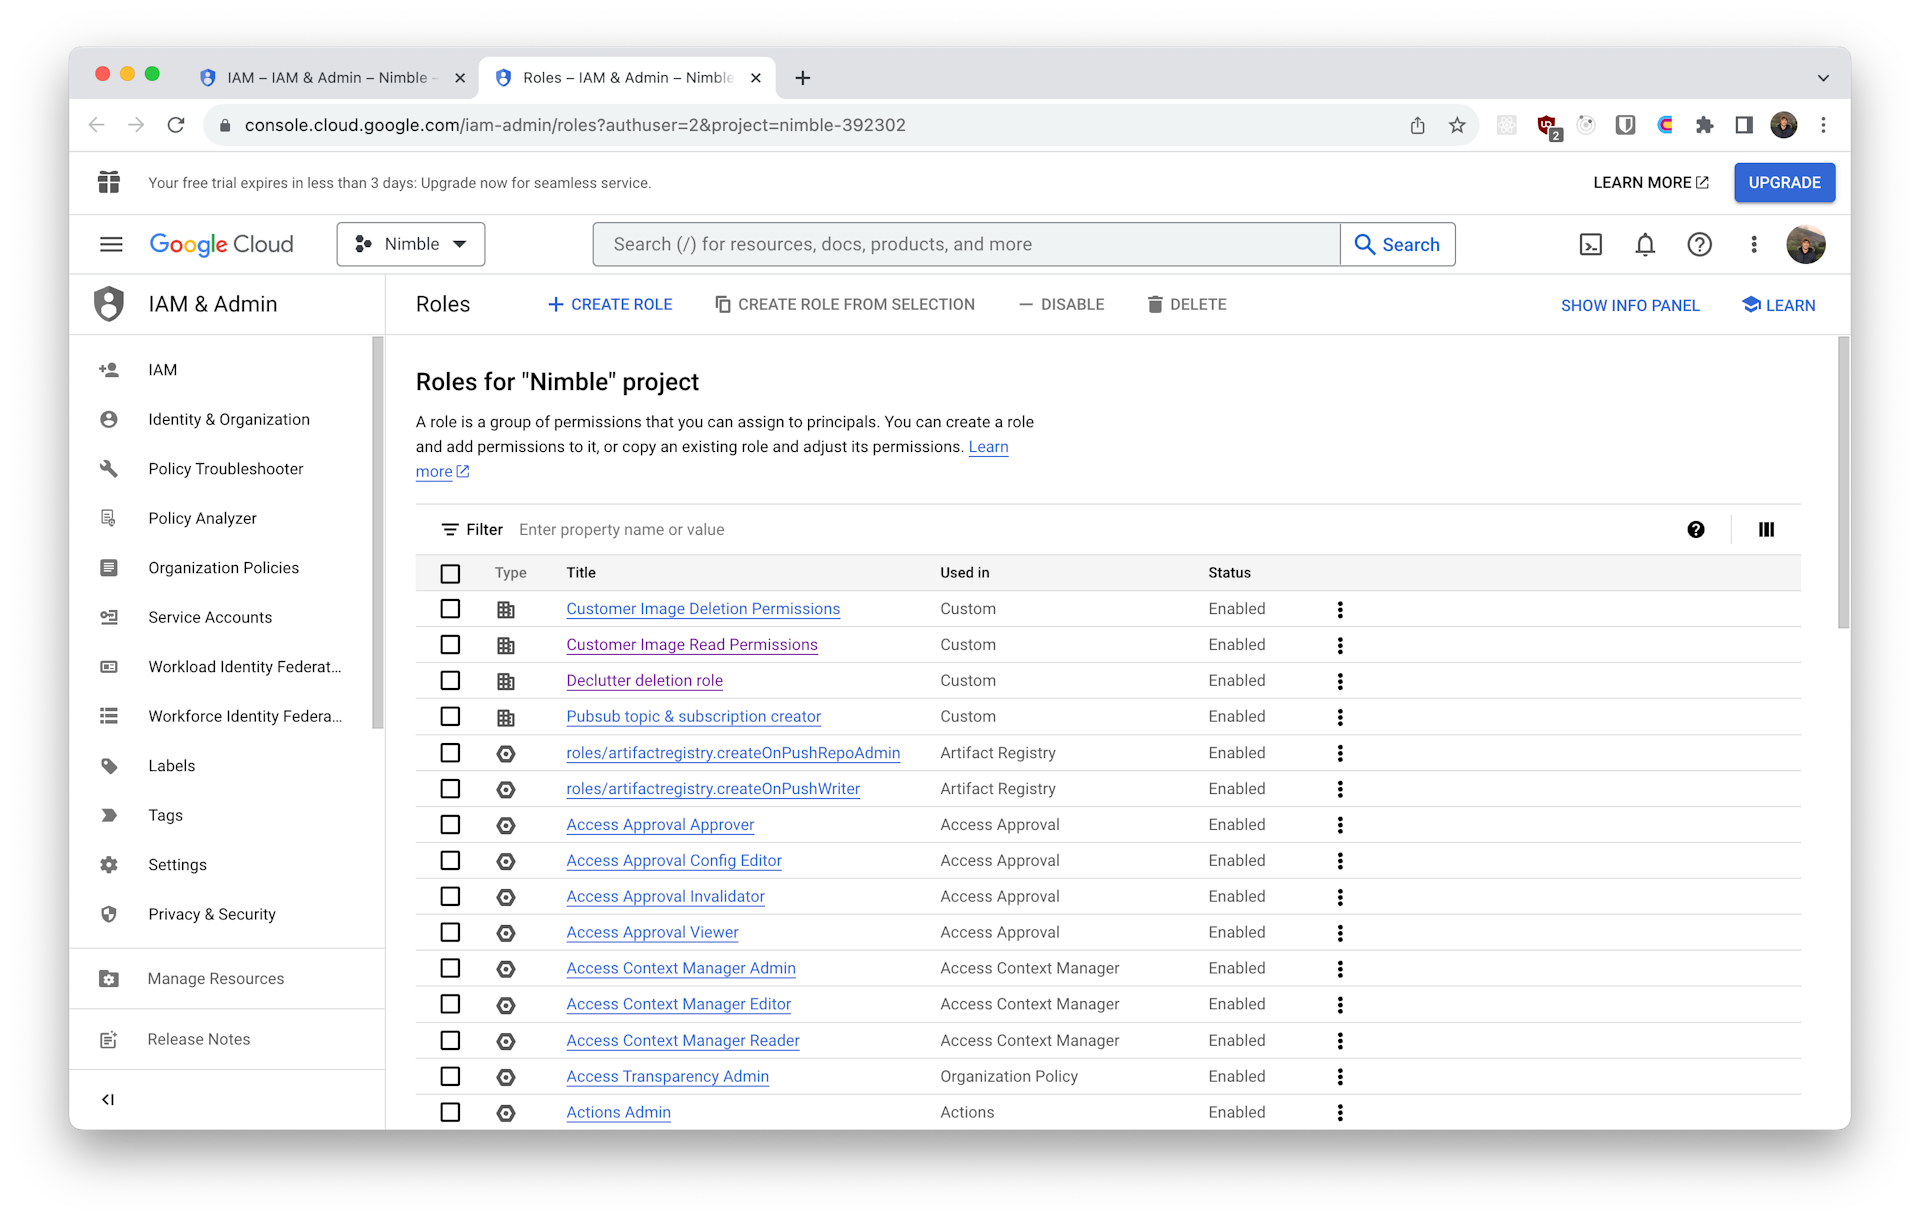 Screenshot of the Google Cloud Console showing Roles subsection of the IAM & Admin section.